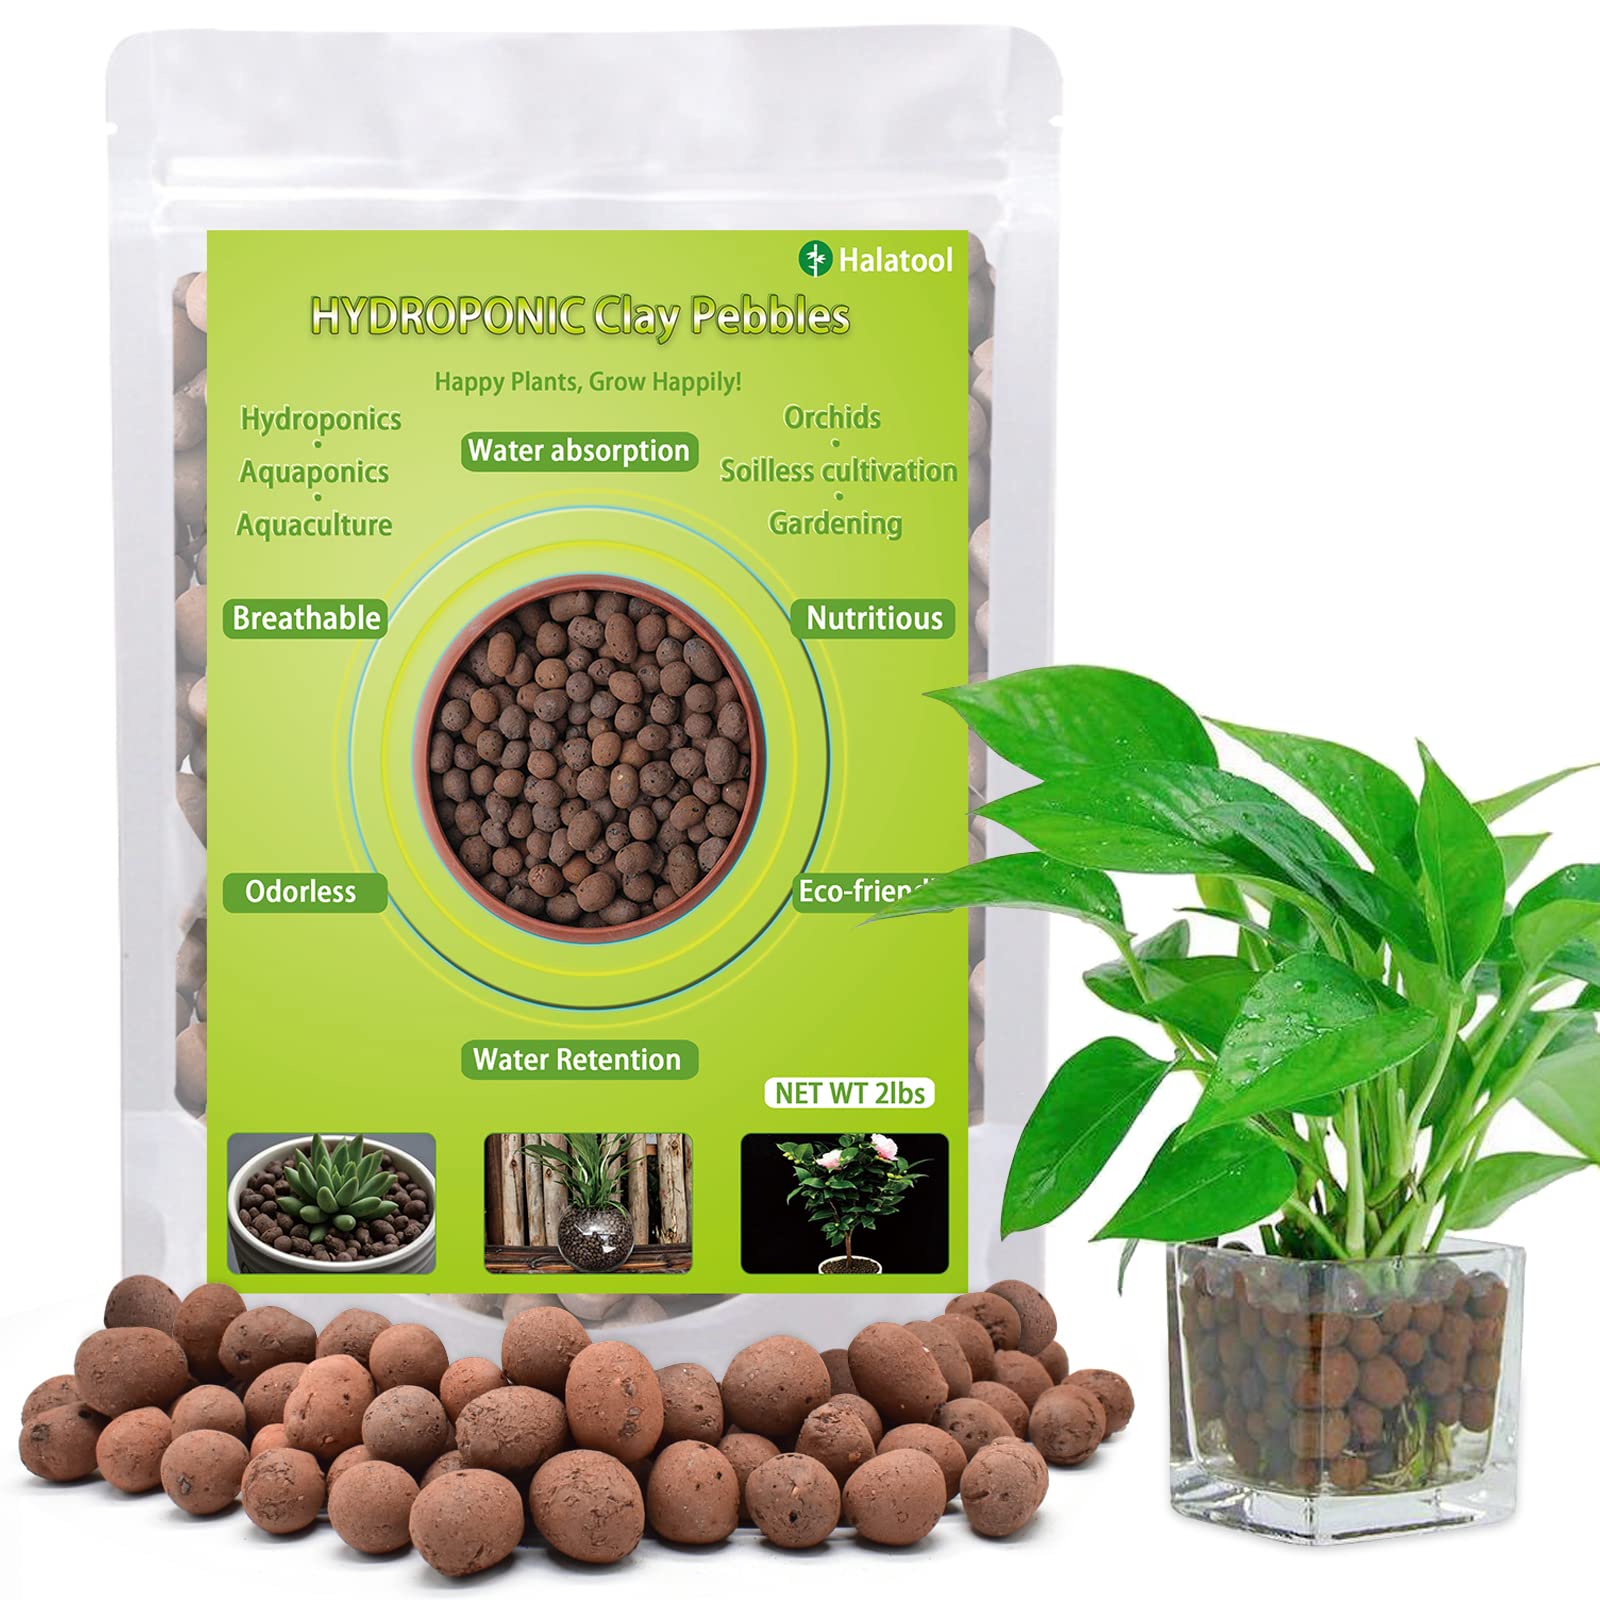 Halatool 2 LBS Organic Clay Pebbles- 4mm-16mm 100% Natural Expanded Clay Pebbles for Hydroponic Gardening, Orchids, Drainage, De